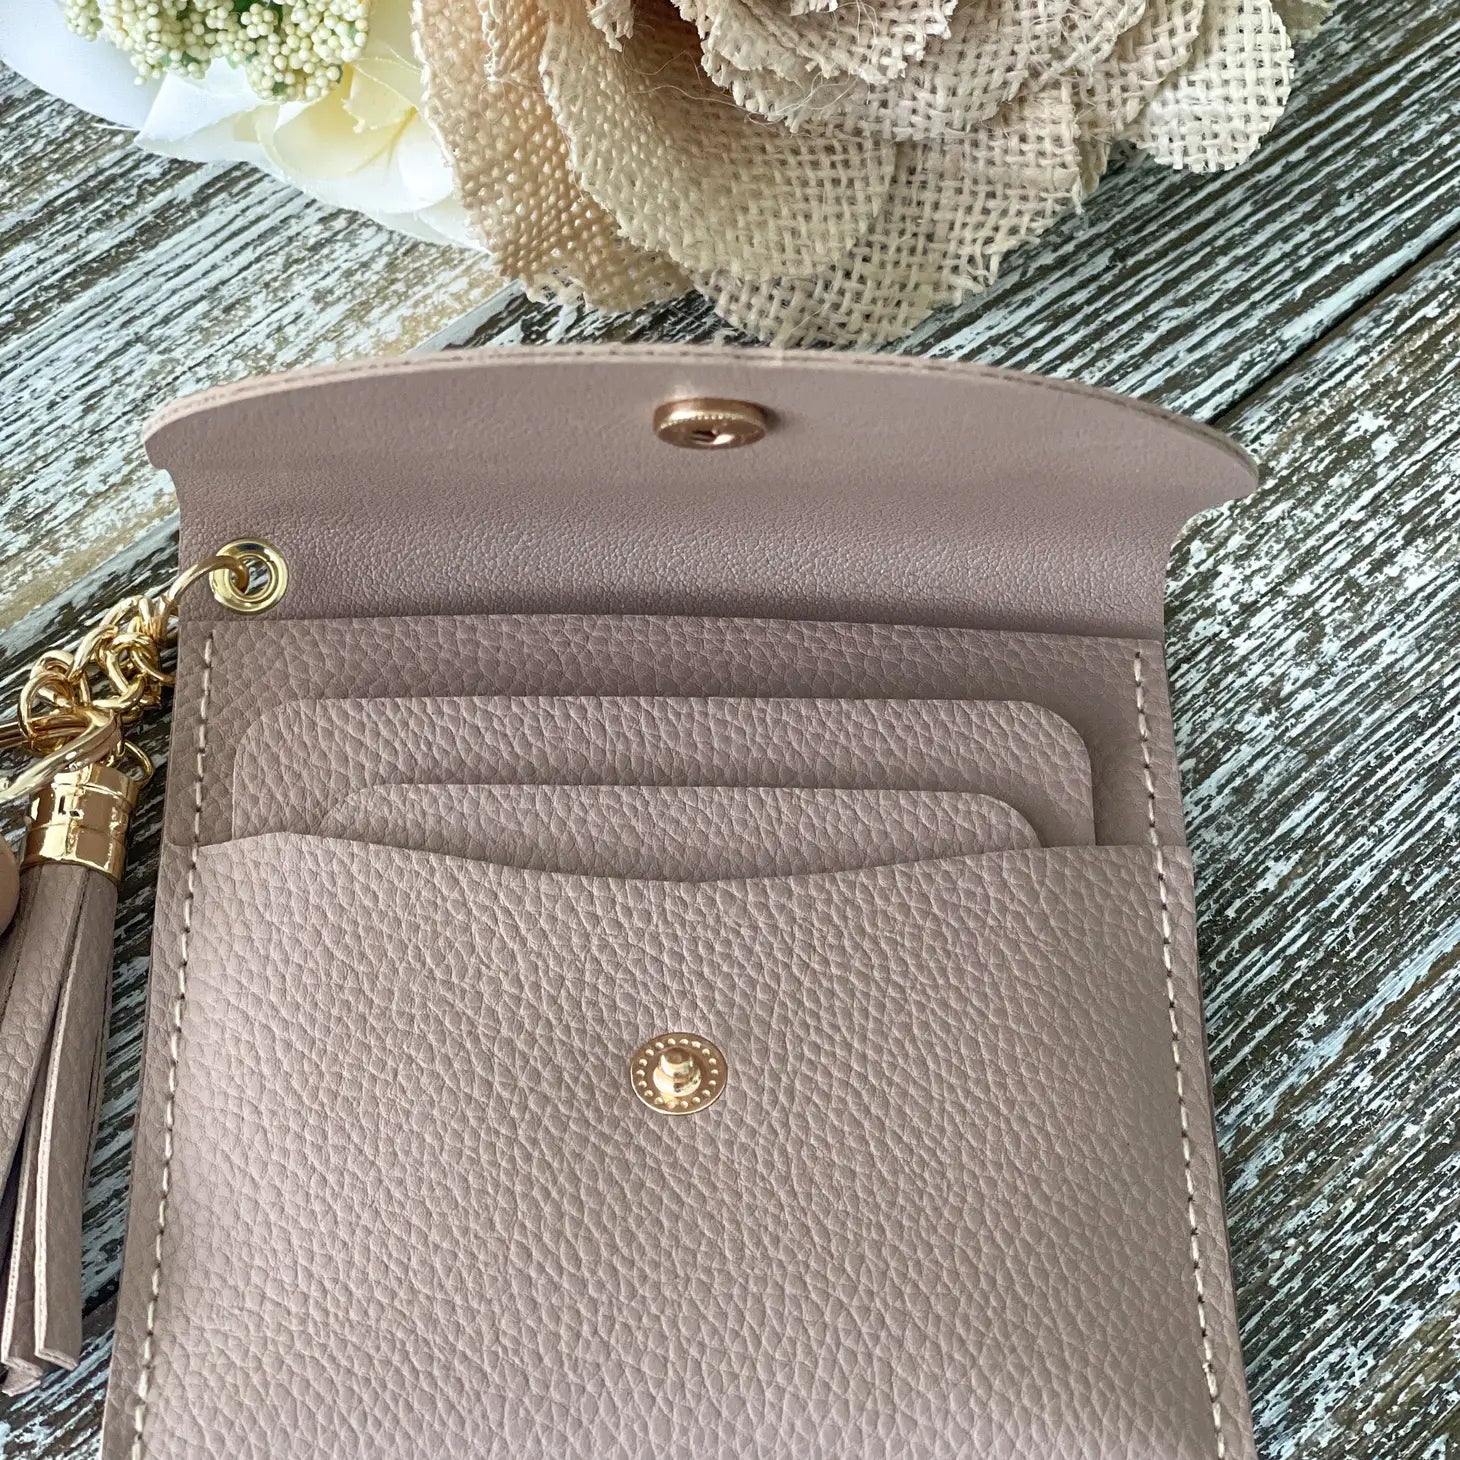 Snap Closure Wallet Keychain Taupe